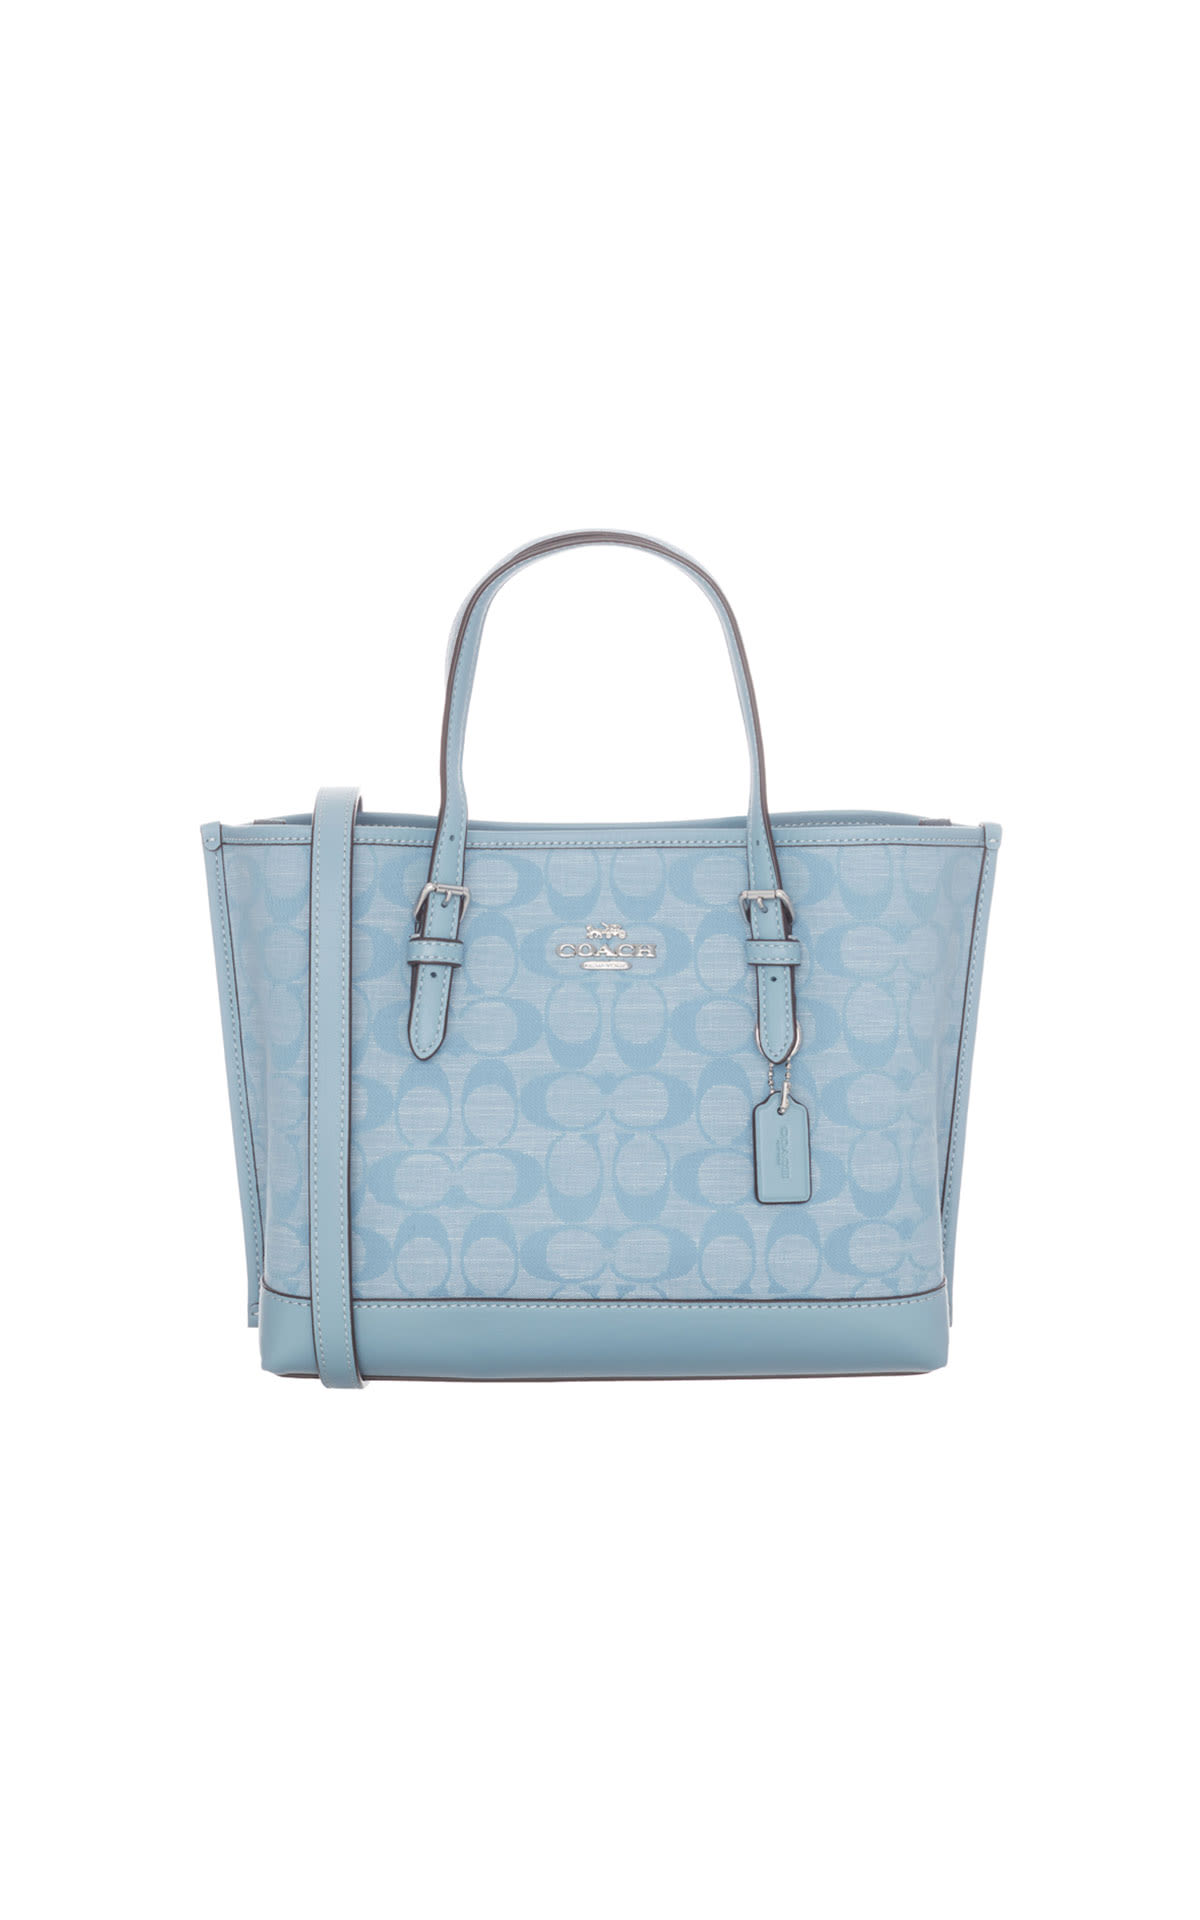 Coach Mollie 25 tote from Bicester Village